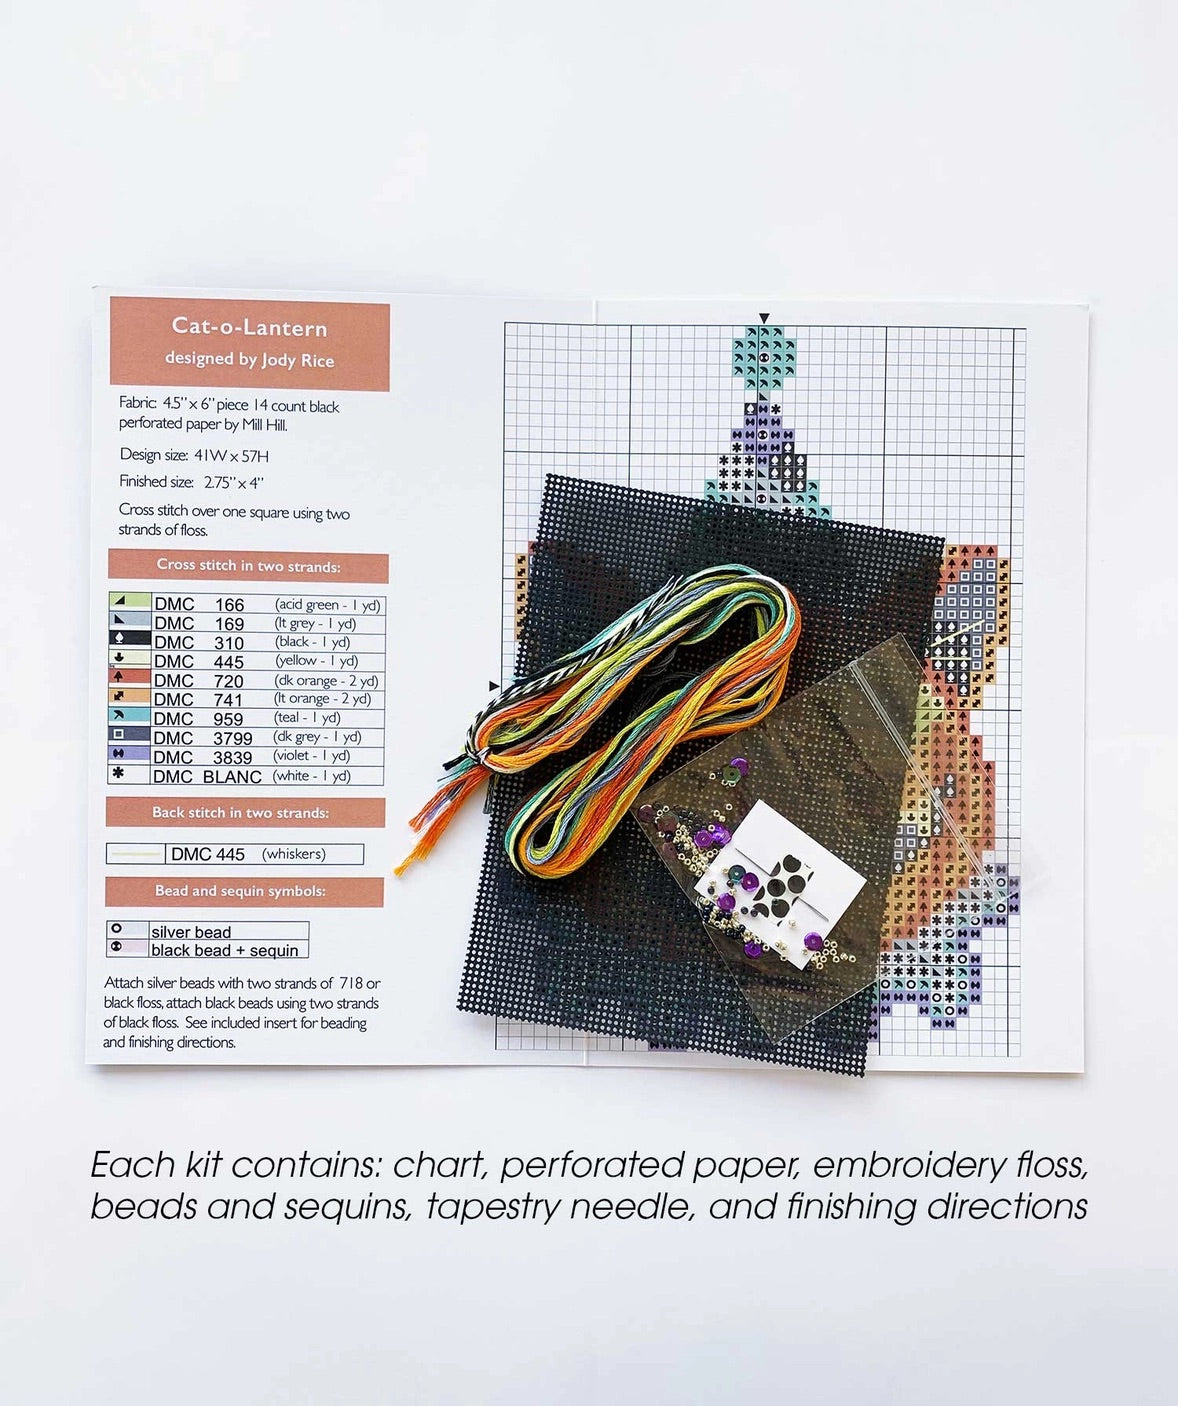 House Guests - Cross Stitch Ornament Kit — The Blue Peony